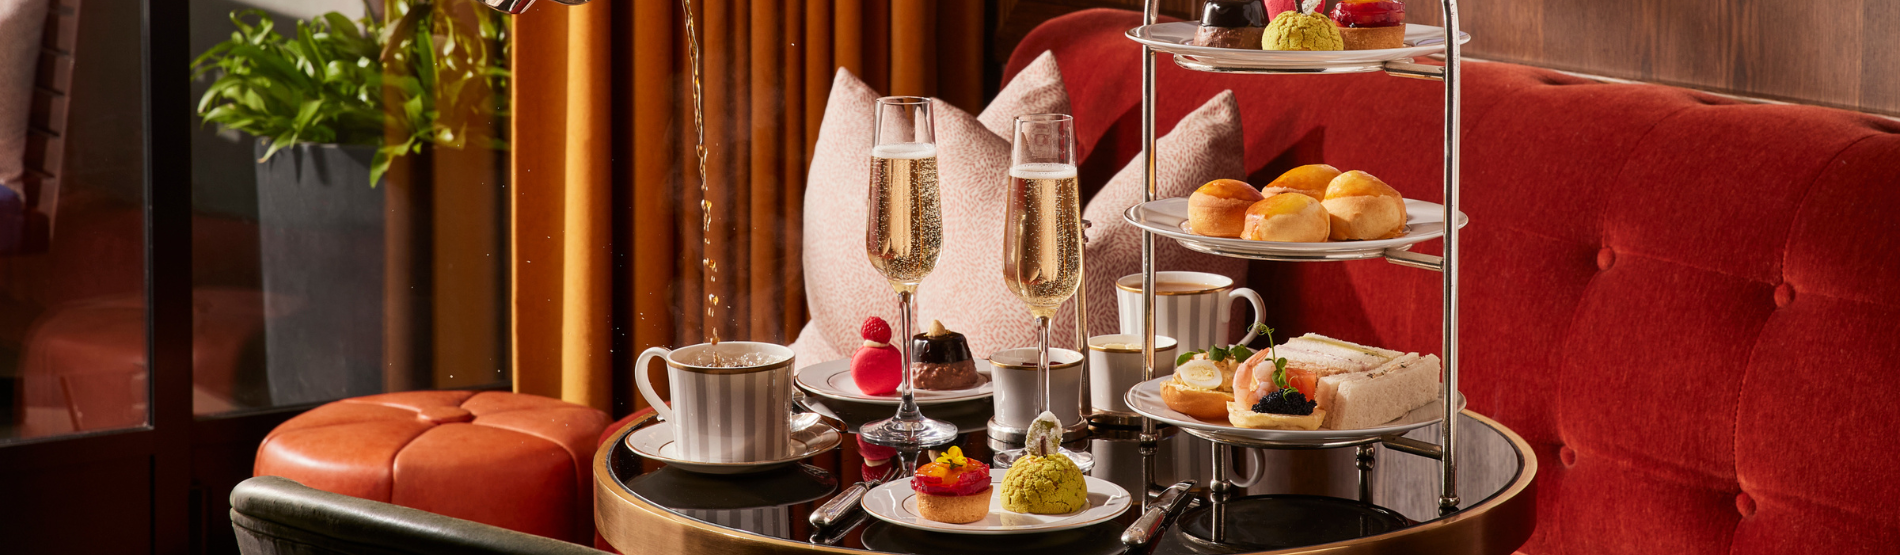 Afternoon Tea served at the Marylebone with champagne